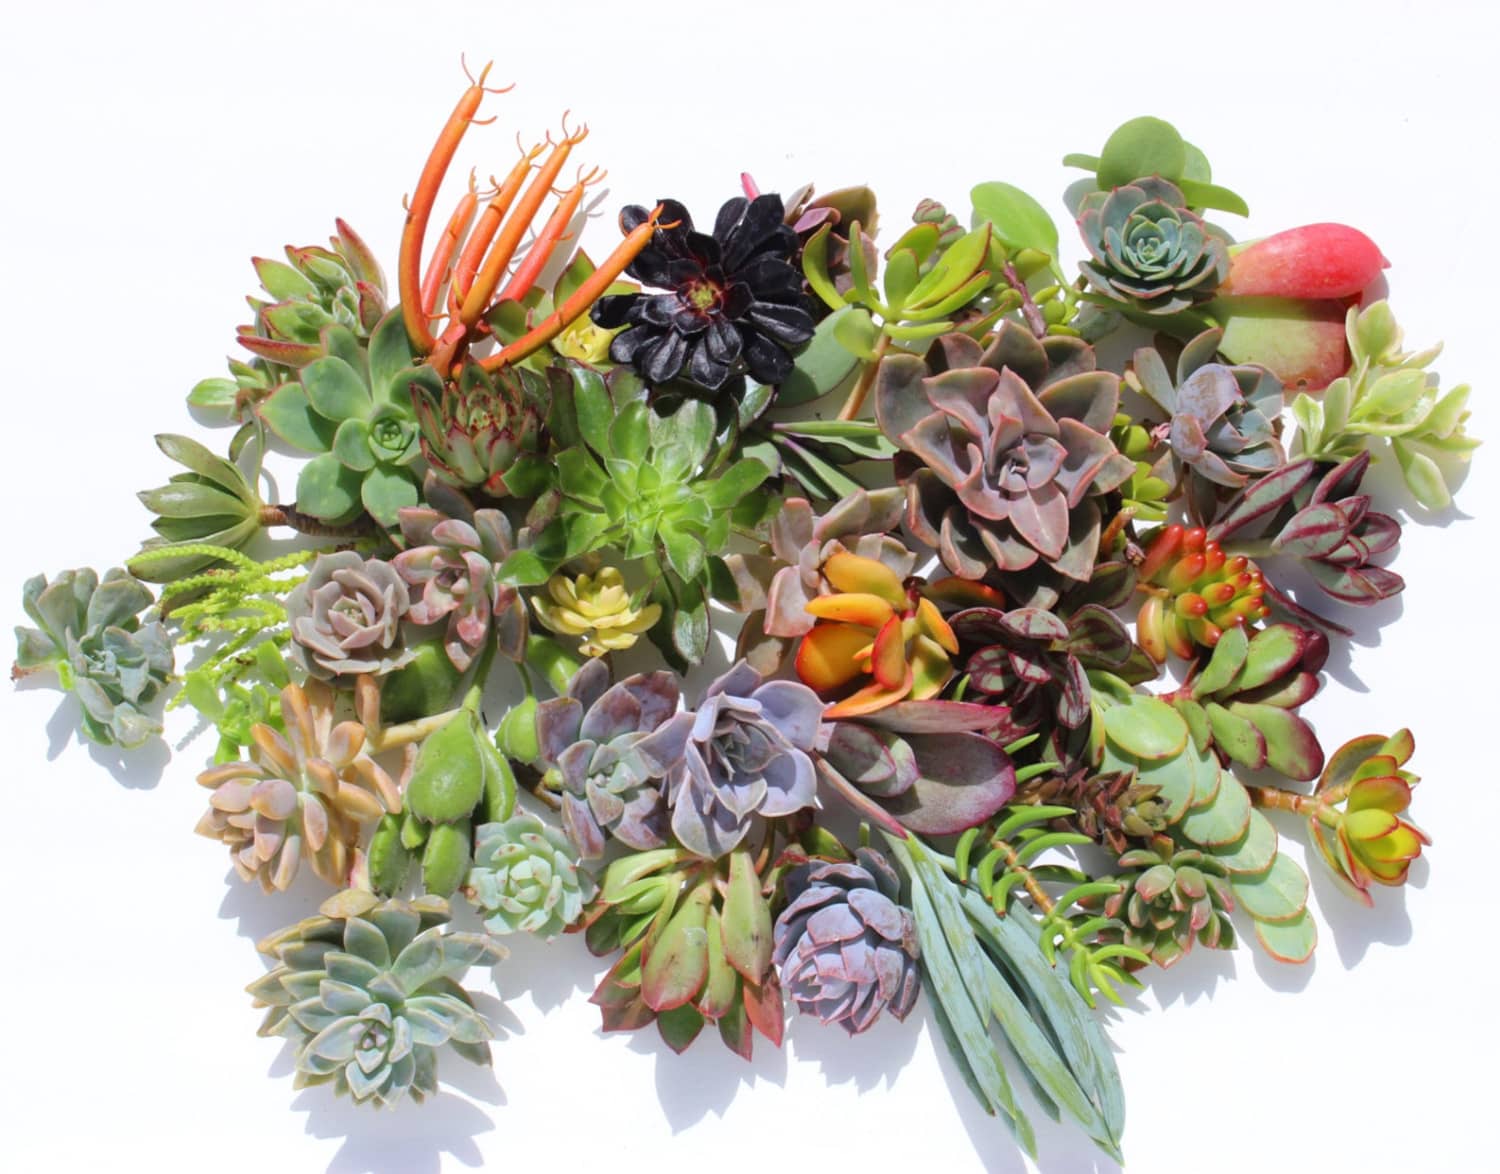 Etsy Has A Collection of Succulent Starter Kits